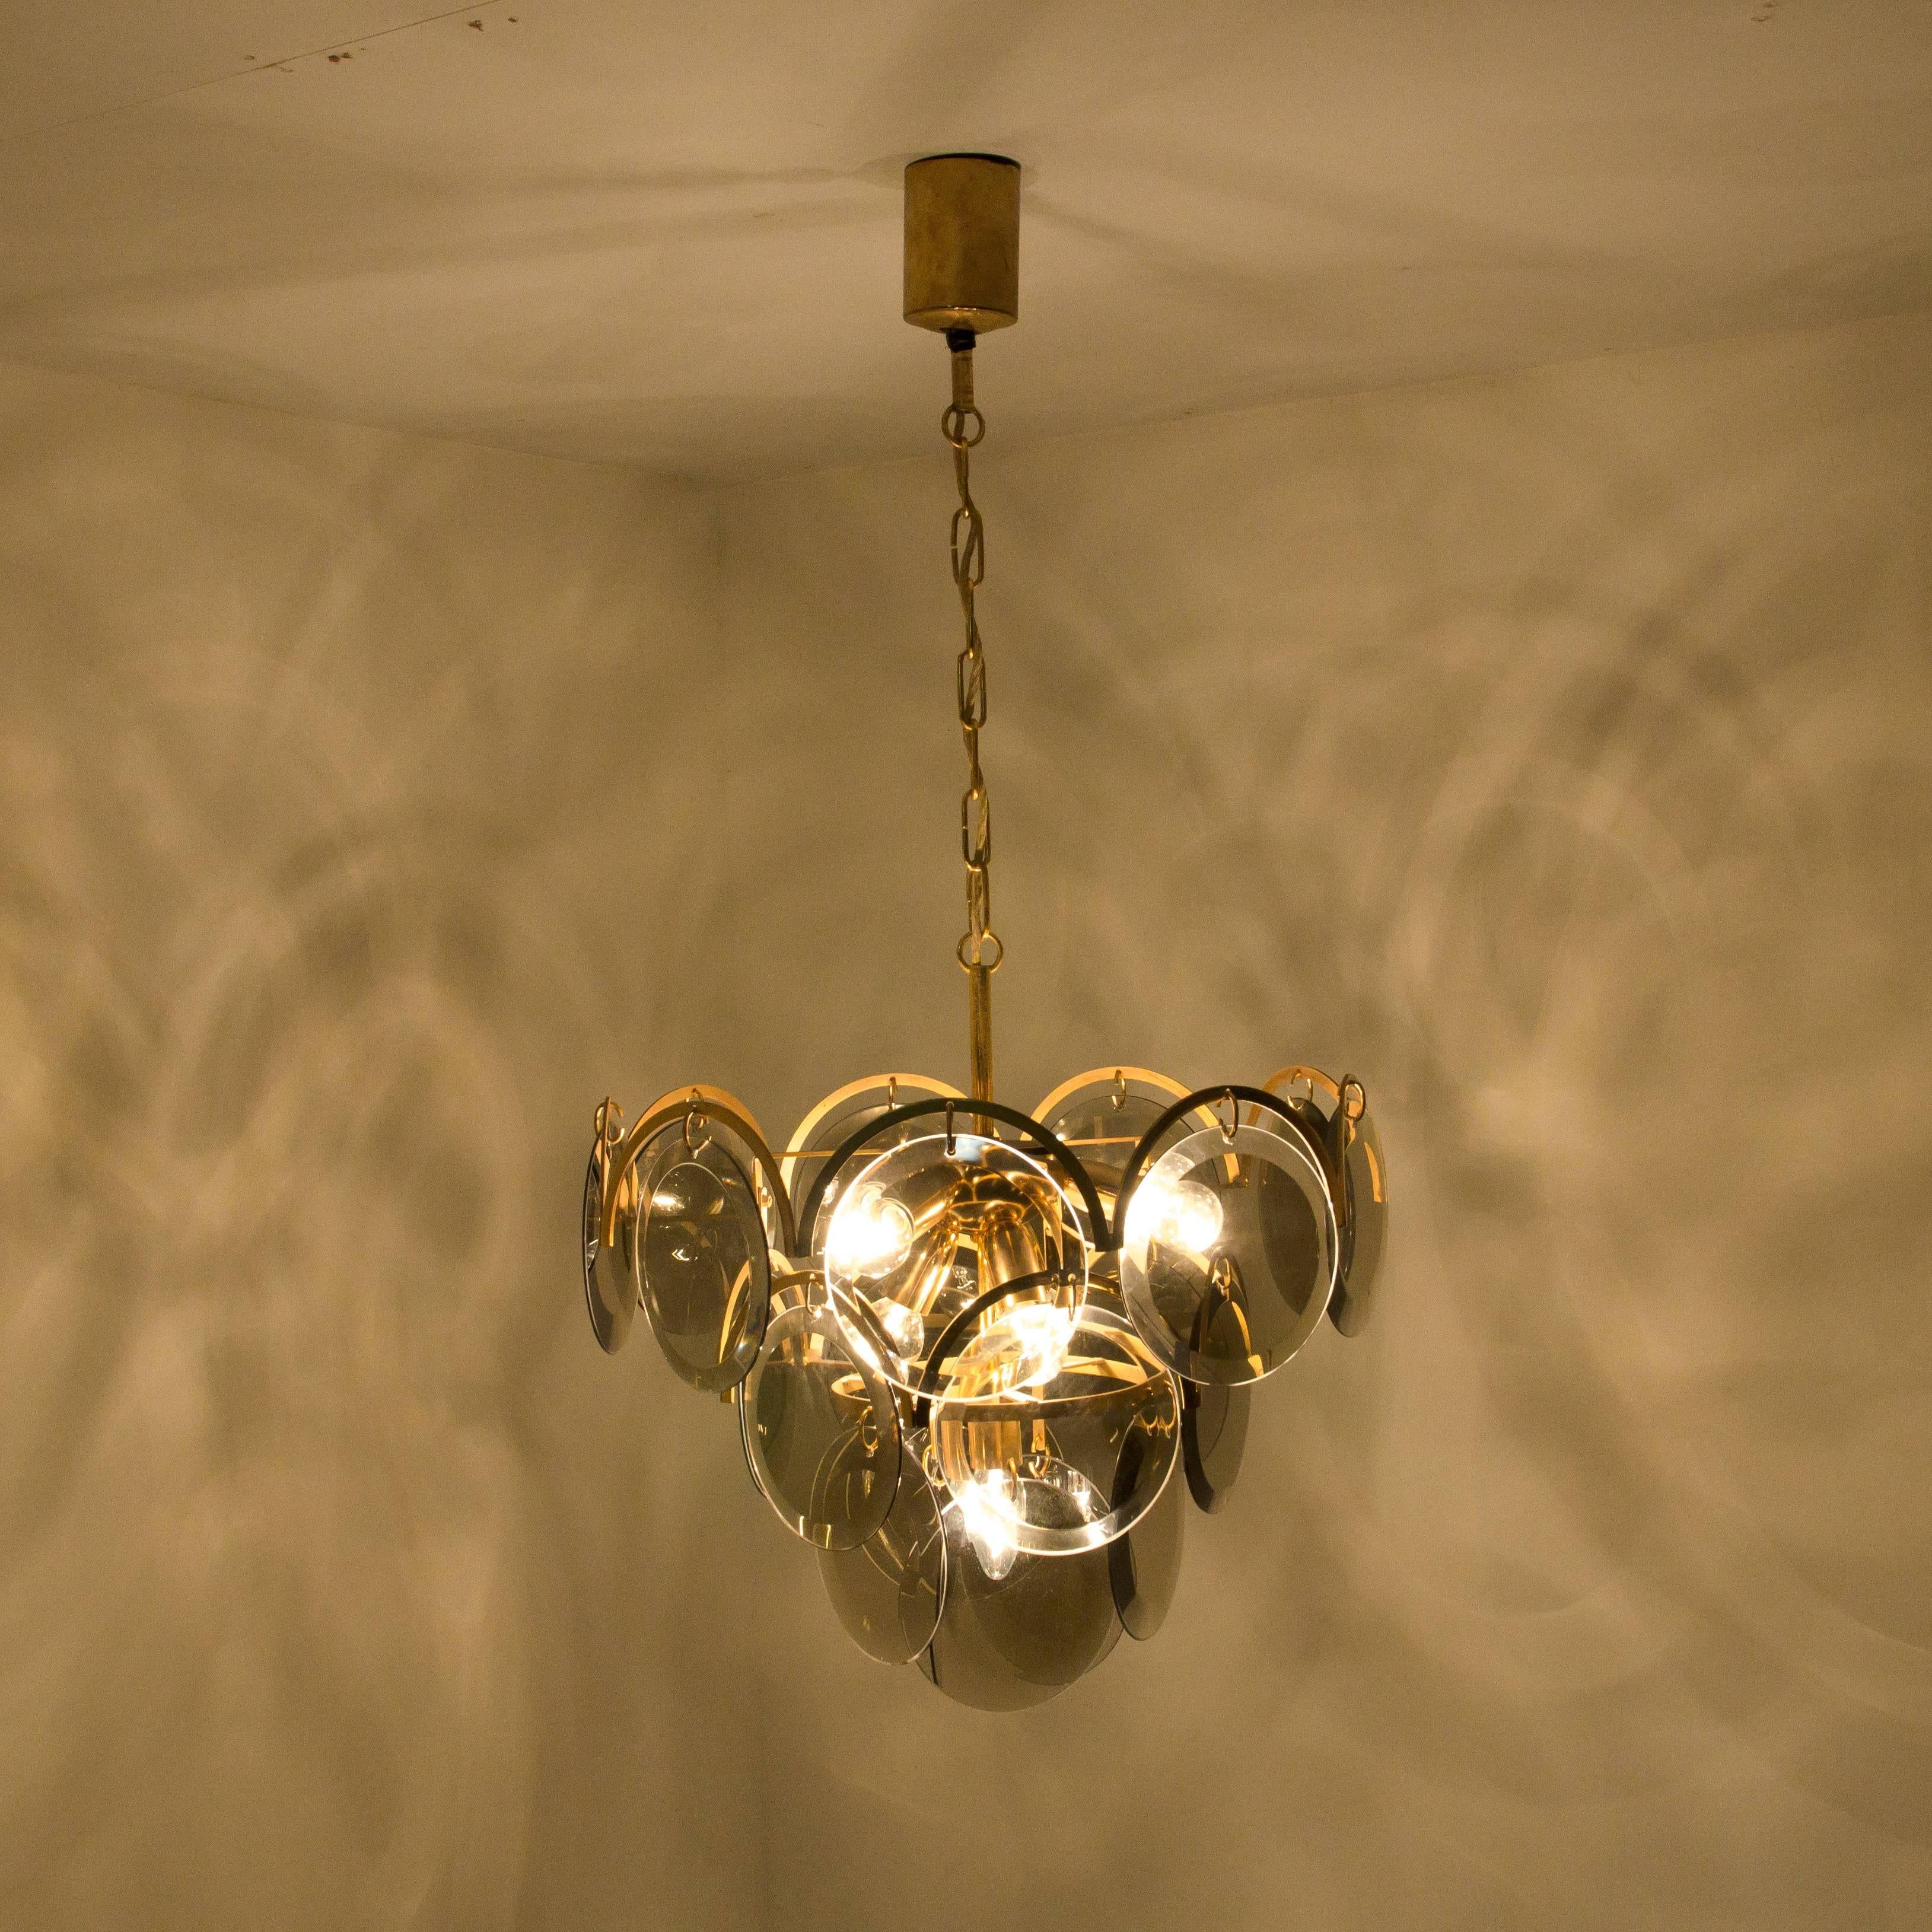 Set of Three Smoked Glass and Brass Chandeliers in the Style of Vistosi, Italy For Sale 5